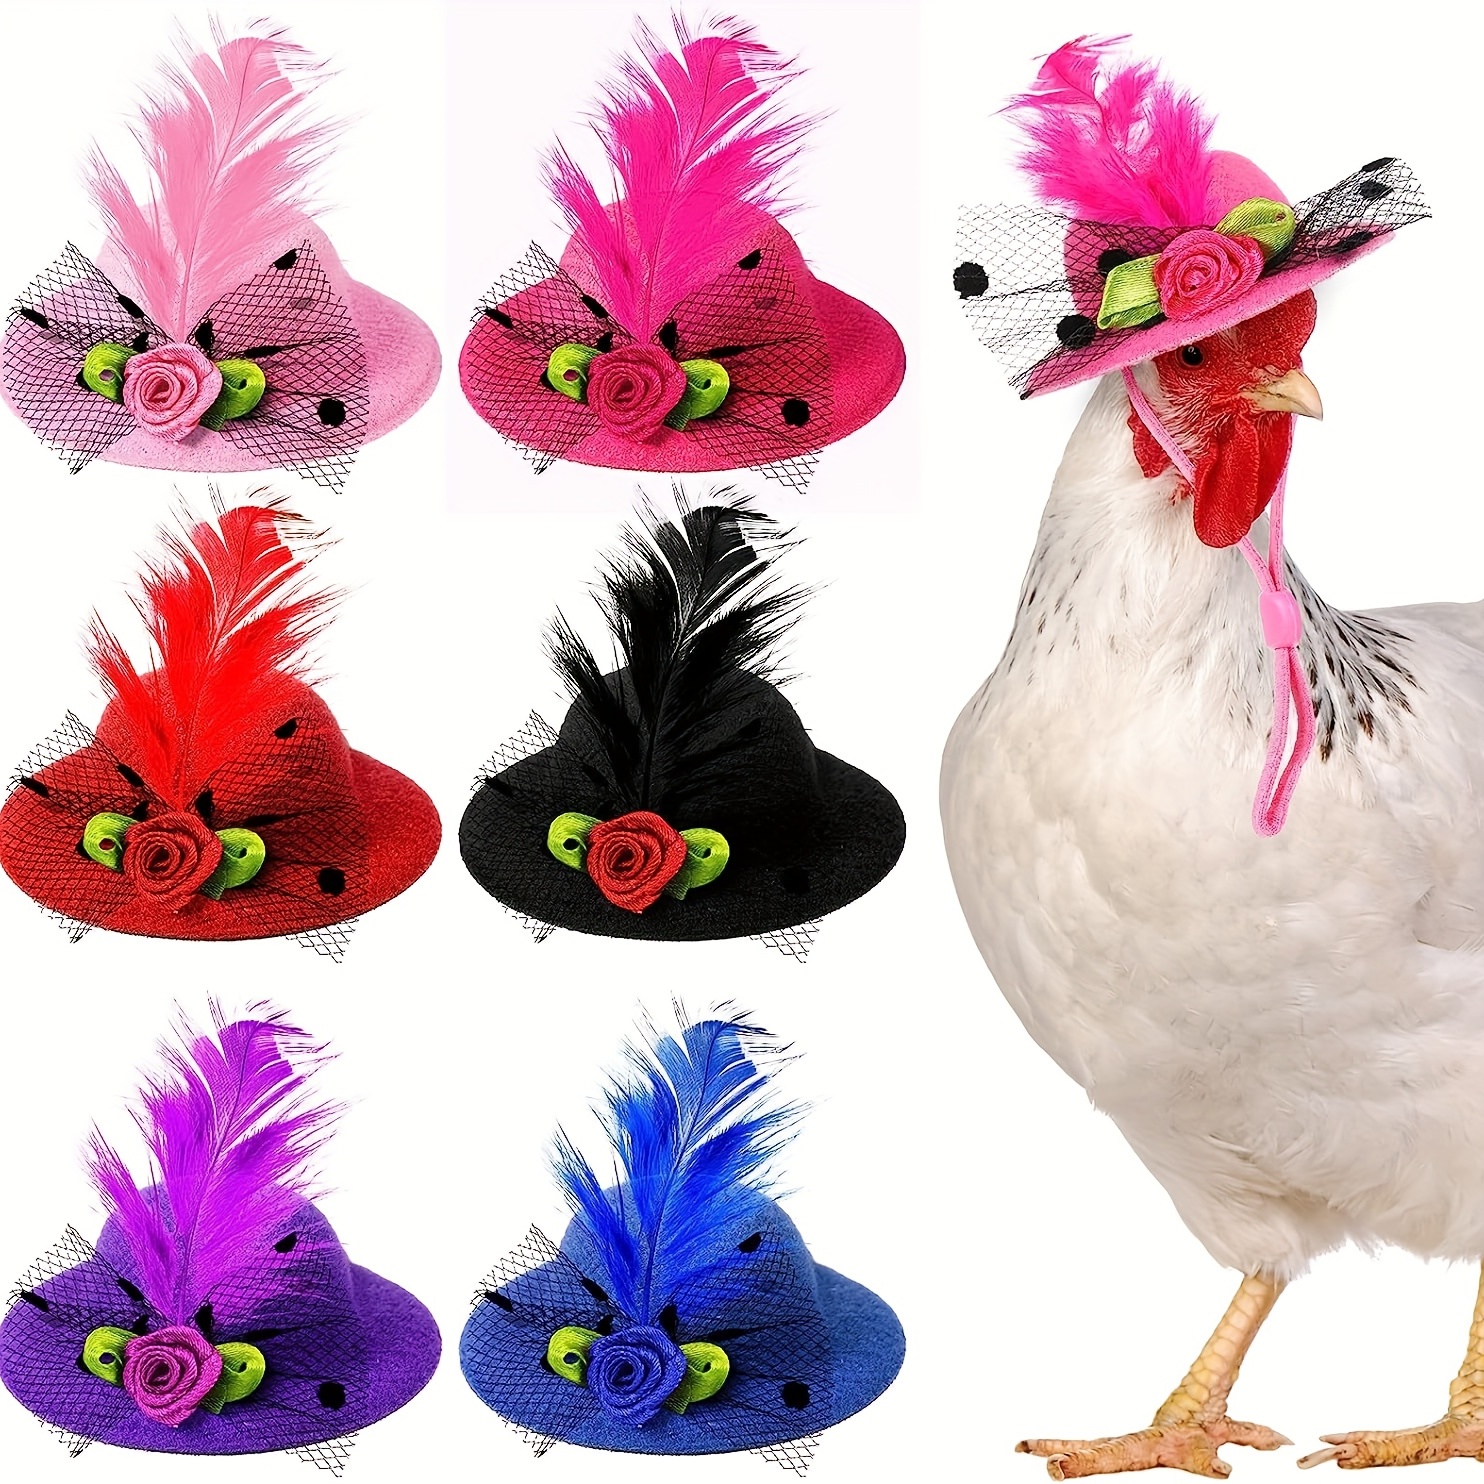 Yuehuam Chicken Arms Toy for Chickens to Wear, Chicken Muscle Arms to Put  on Chickens, Funny Arms Costume Cosplay for Chickens Rooster Hens Thumbs Up